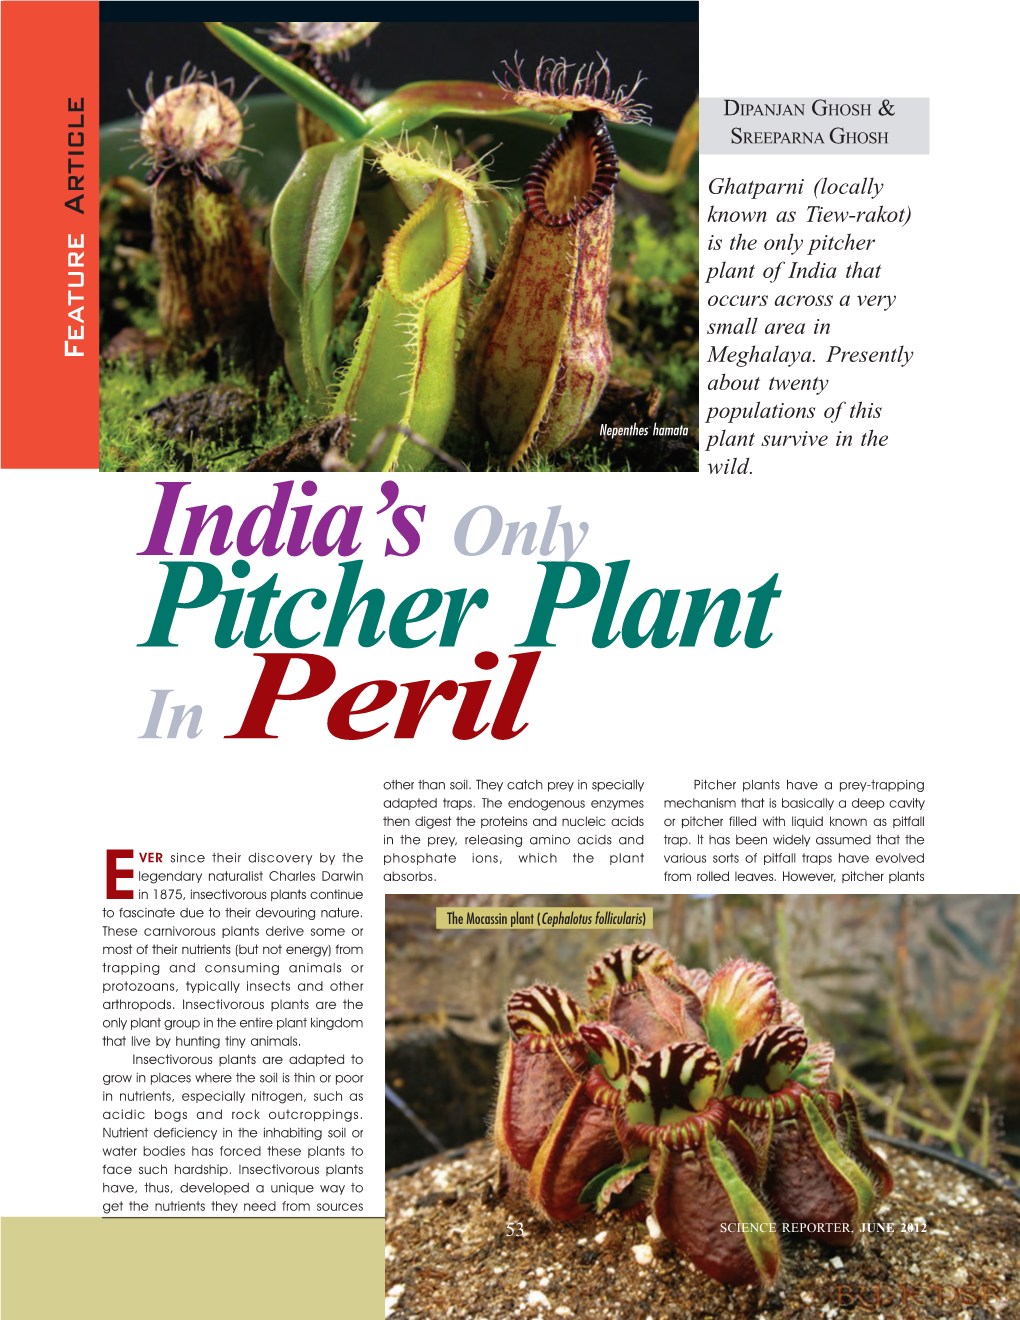 India's Only Pitcher Plant in Peril